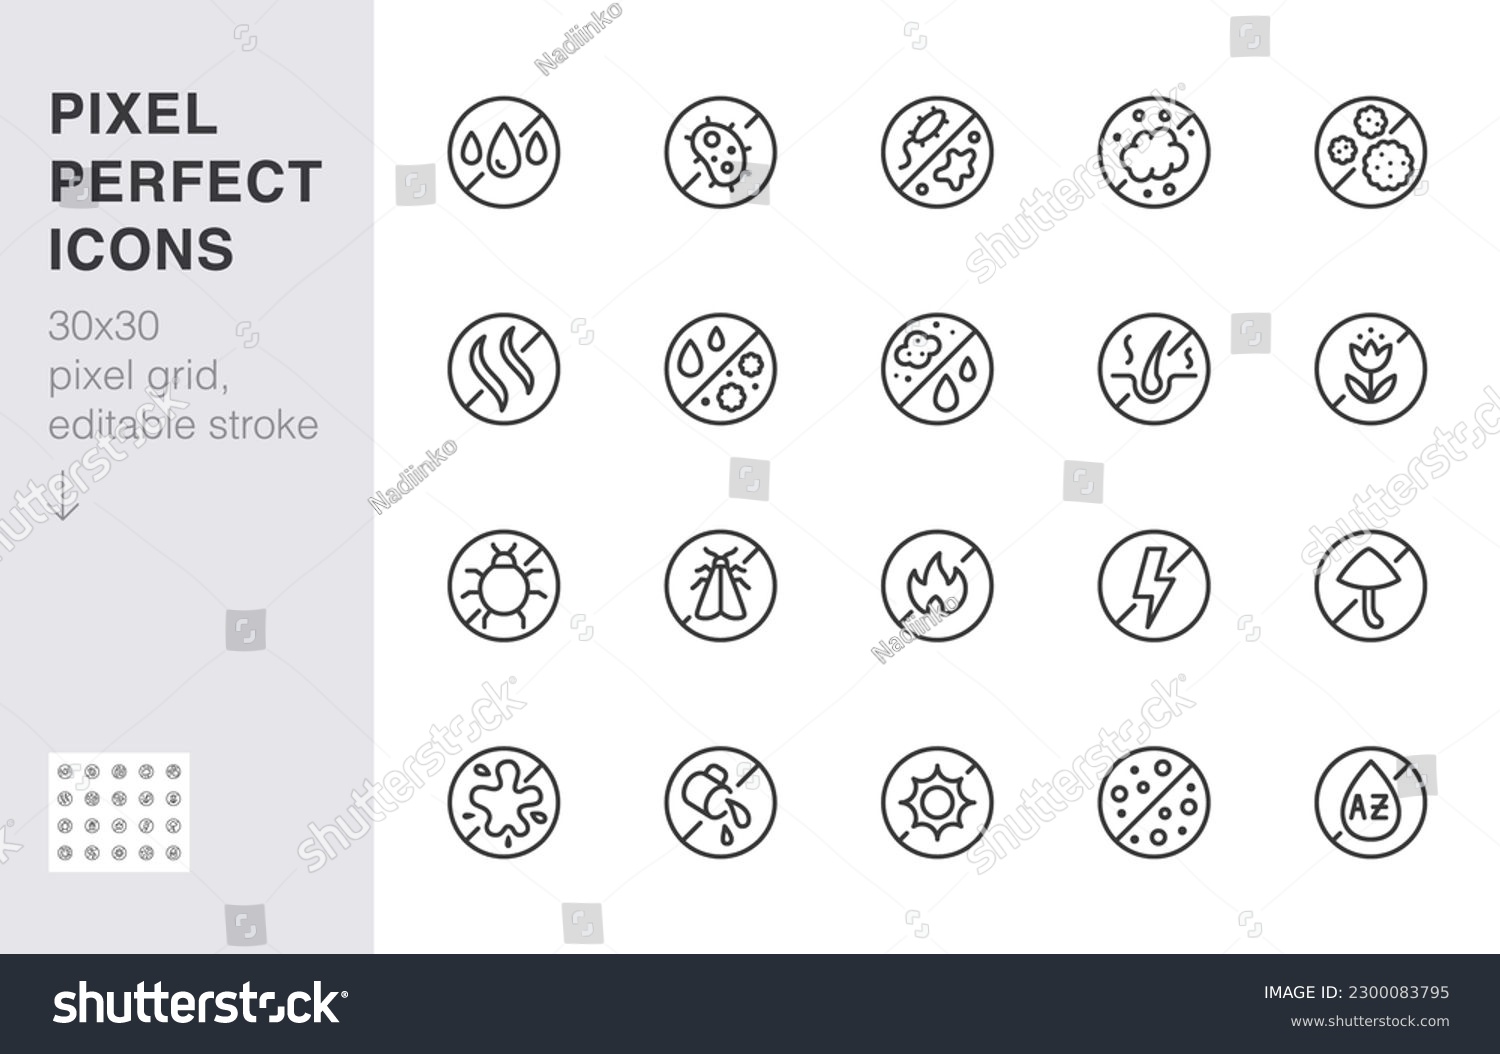 SVG of Fabric material protection line icon set. Sweat resistant, antibacterial proof, antistatic minimal vector illustration. Simple outline sign for clothing material. 30x30 Pixel Perfect, Editable Stroke svg